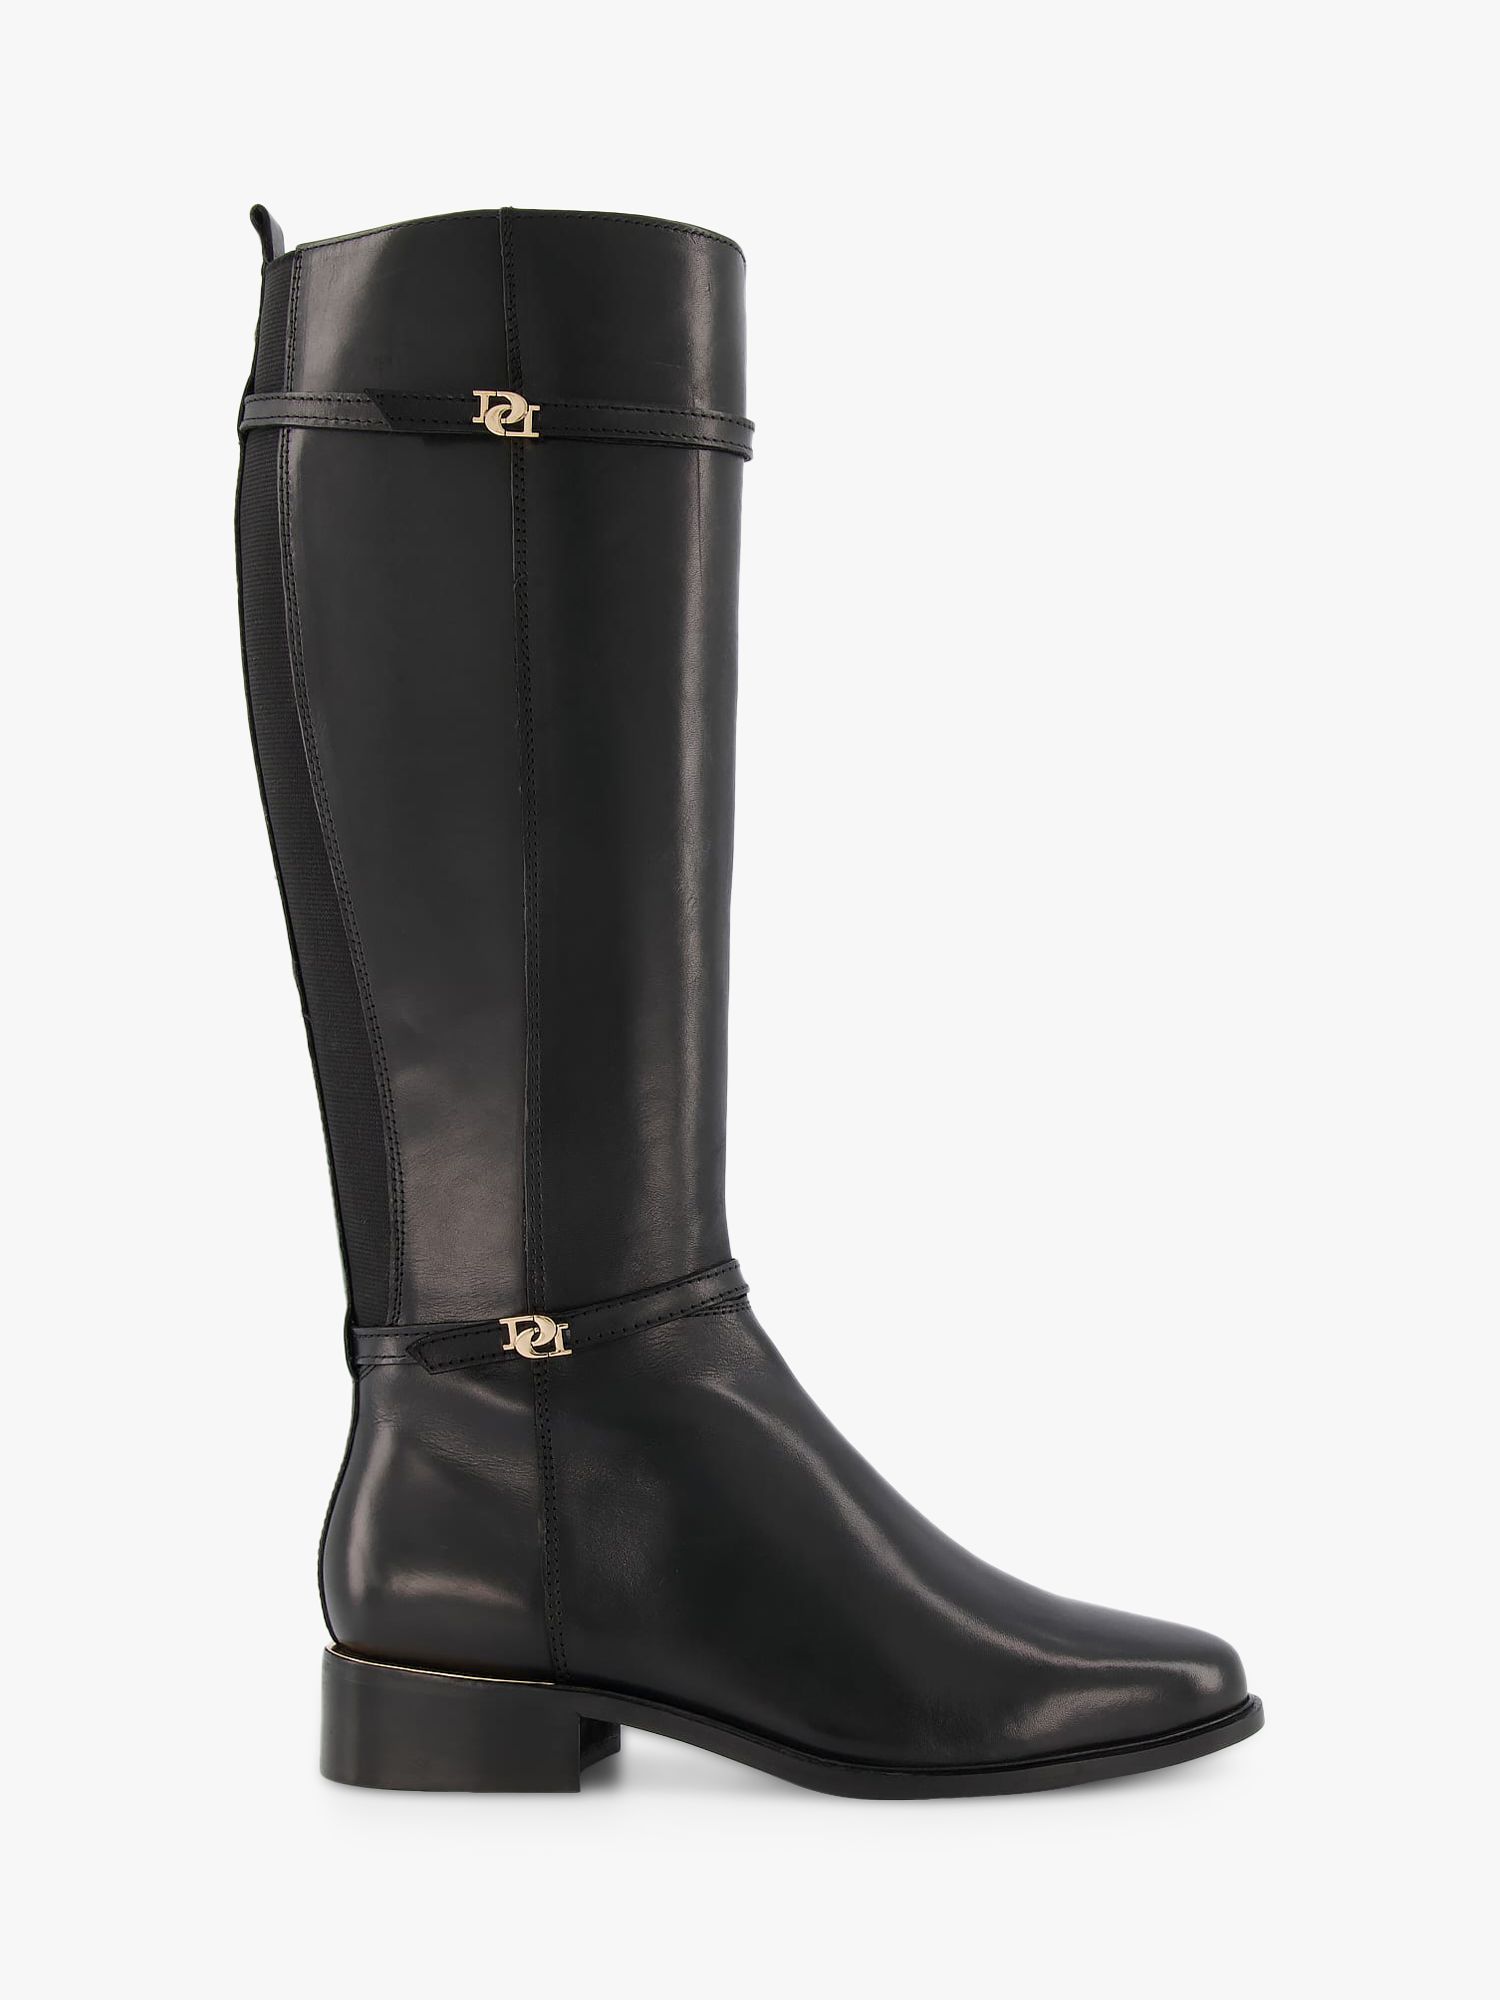 Dune Tap Leather Knee High Boots, Black at John Lewis & Partners